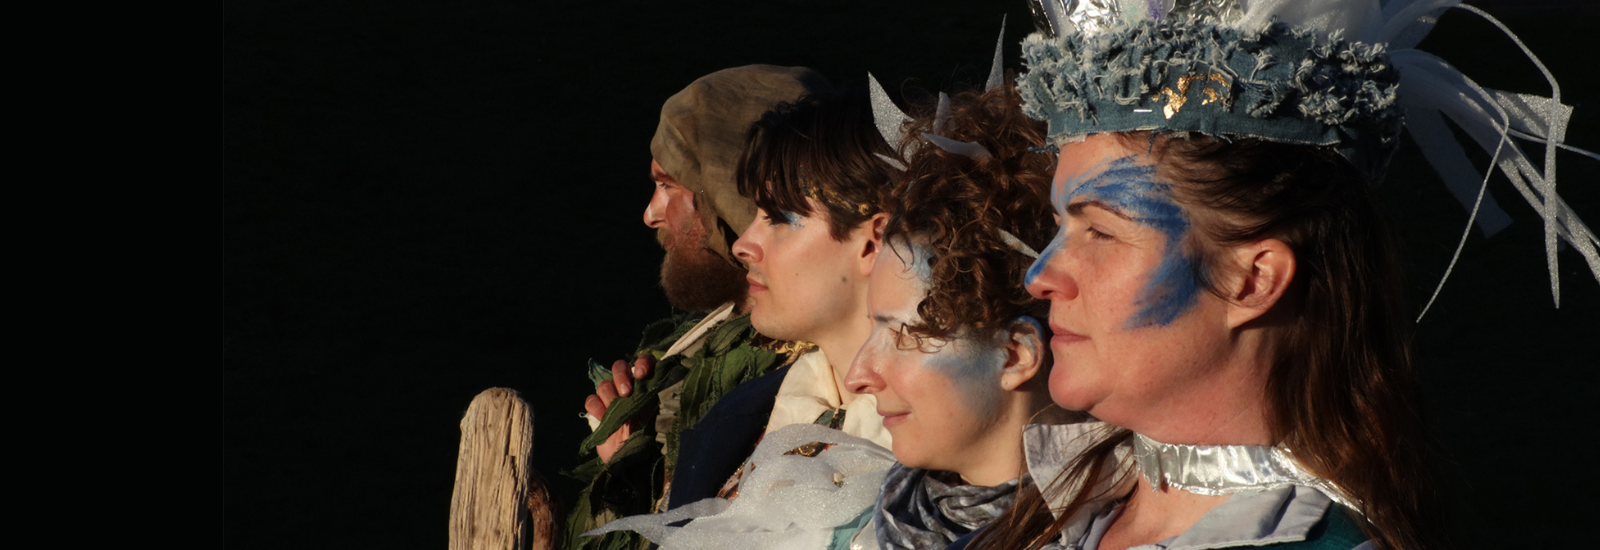 Four characters from The Tempest in costume looking out to the left of the image